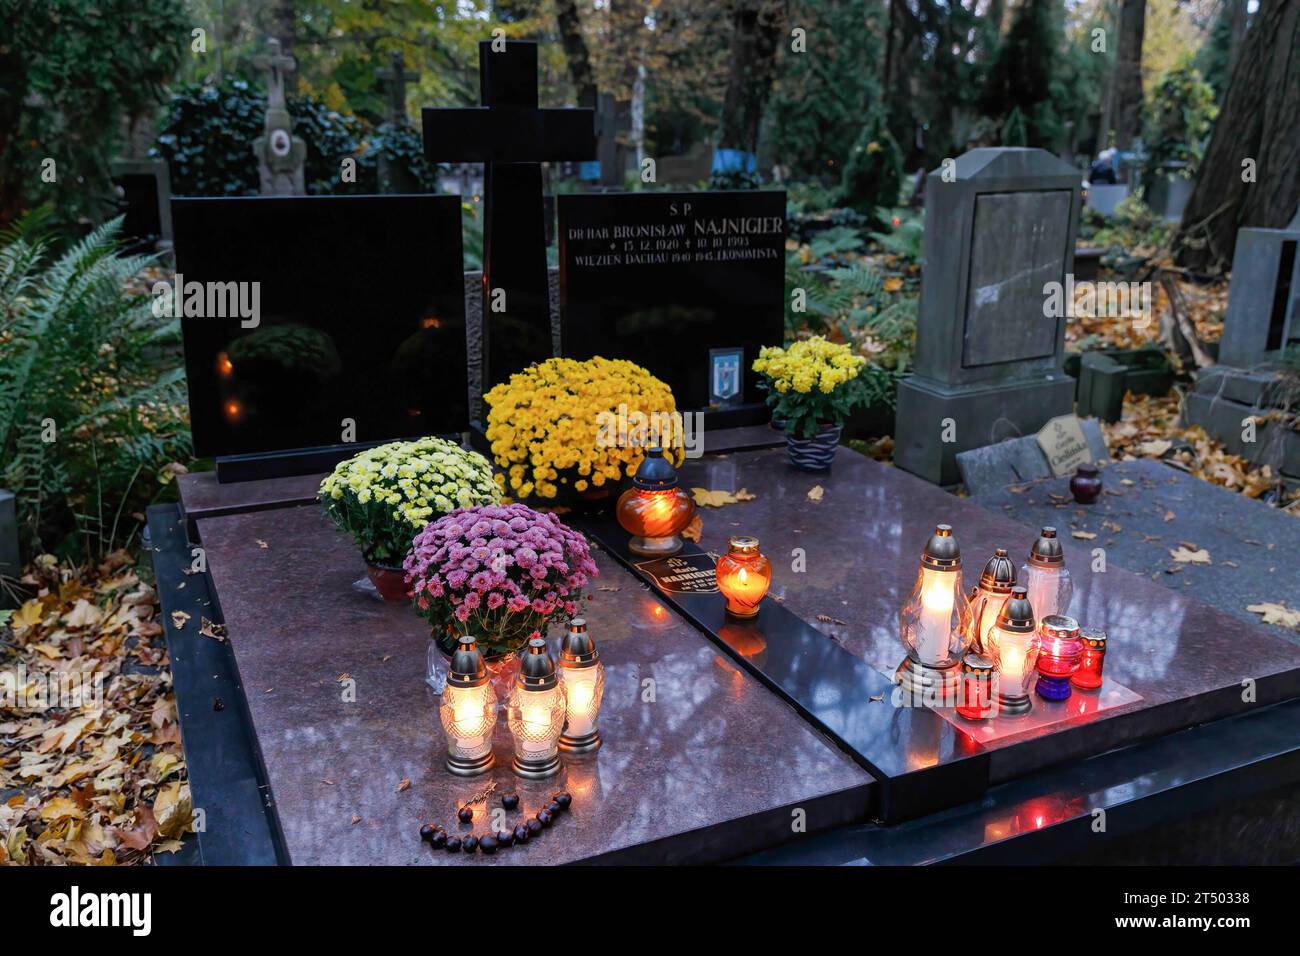 Candles are placed on the grave without name on All Saints' Day at the Evangelical-Augsburg Cemetery in Warsaw. All Saints' Day (or Dzie? Zaduszny in Polish) is a public holiday in Poland. It is an opportunity to remember deceased relatives. On this day, people bring flowers, typically chrysanthemums, and candles to cemeteries. The entire cemetery is filled with lights in the darkness. The Evangelical-Augsburg Cemetery is a historic Lutheran Protestant cemetery located in the western part of Warsaw. Since its opening in 1792, more than 100,000 people have been buried there. (Photo by Volha Shu Stock Photo